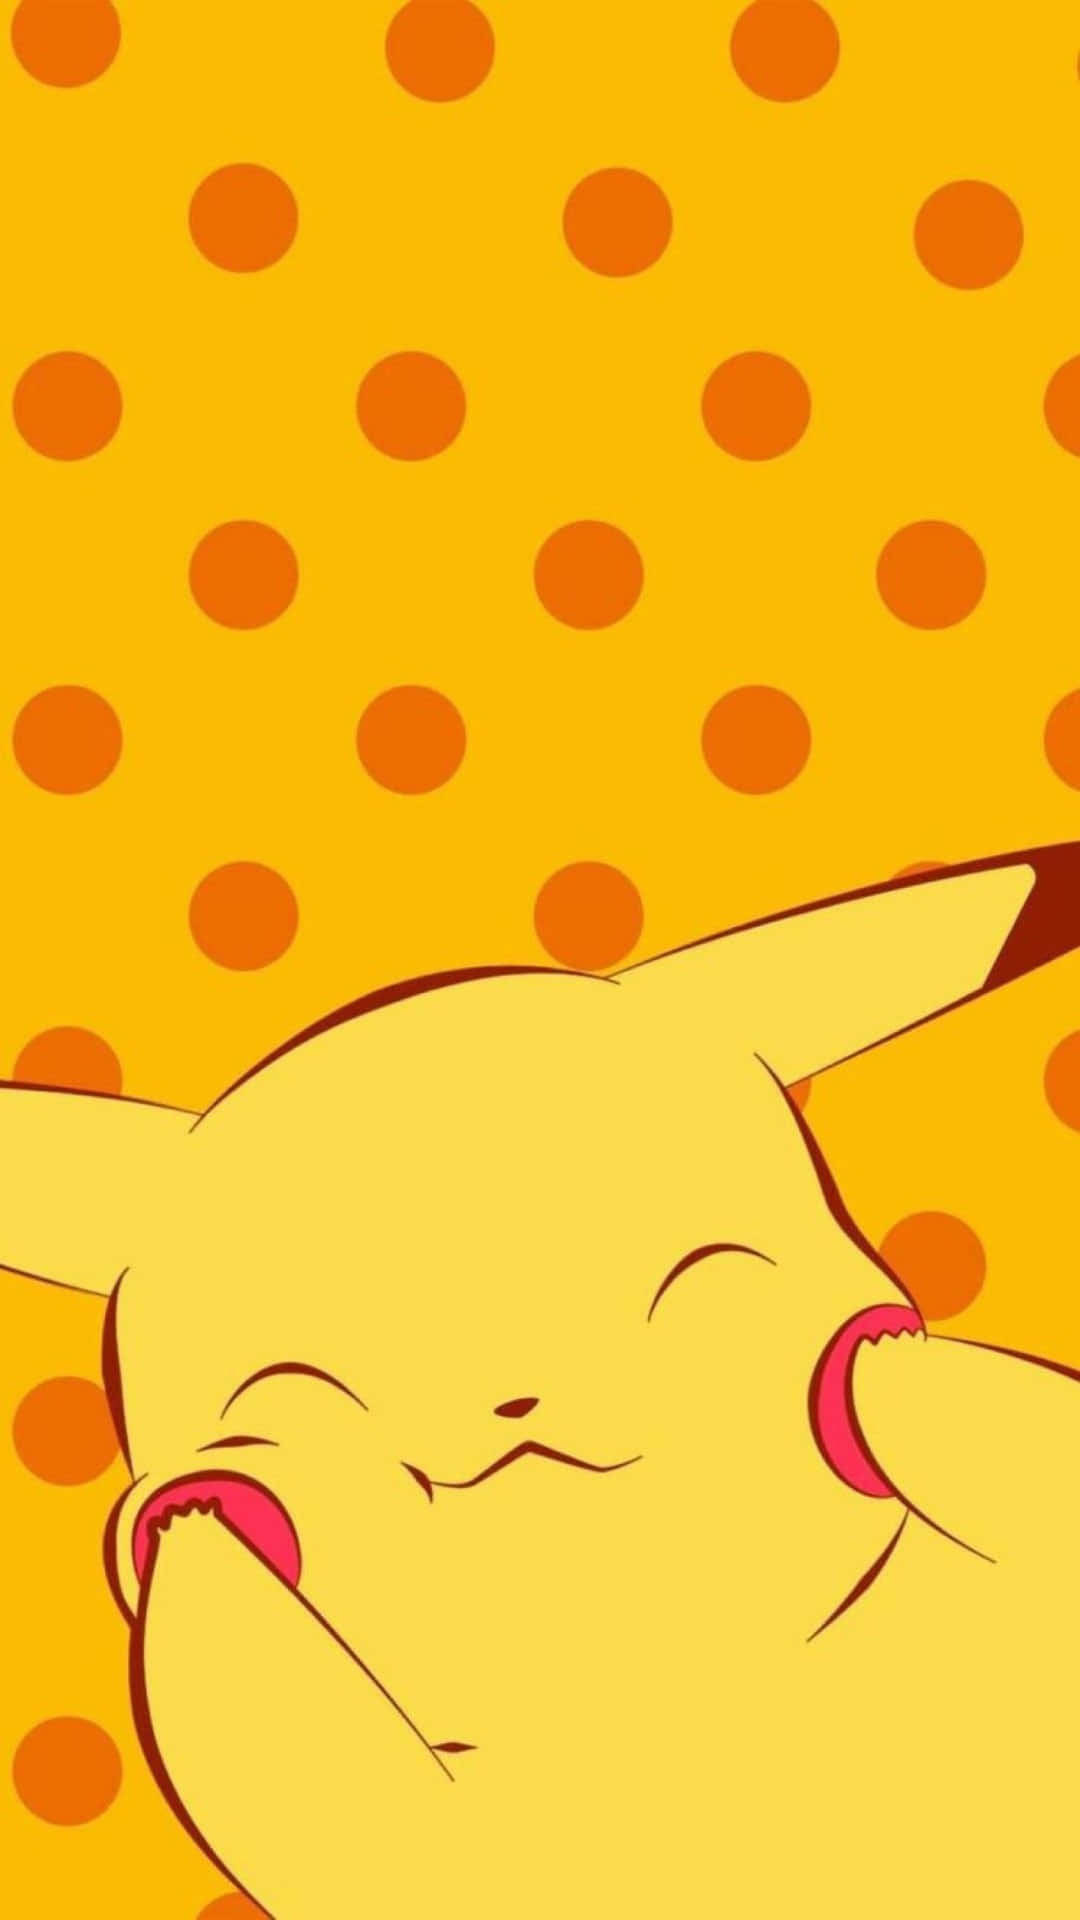 Pikachu On Seamless Circle Picture